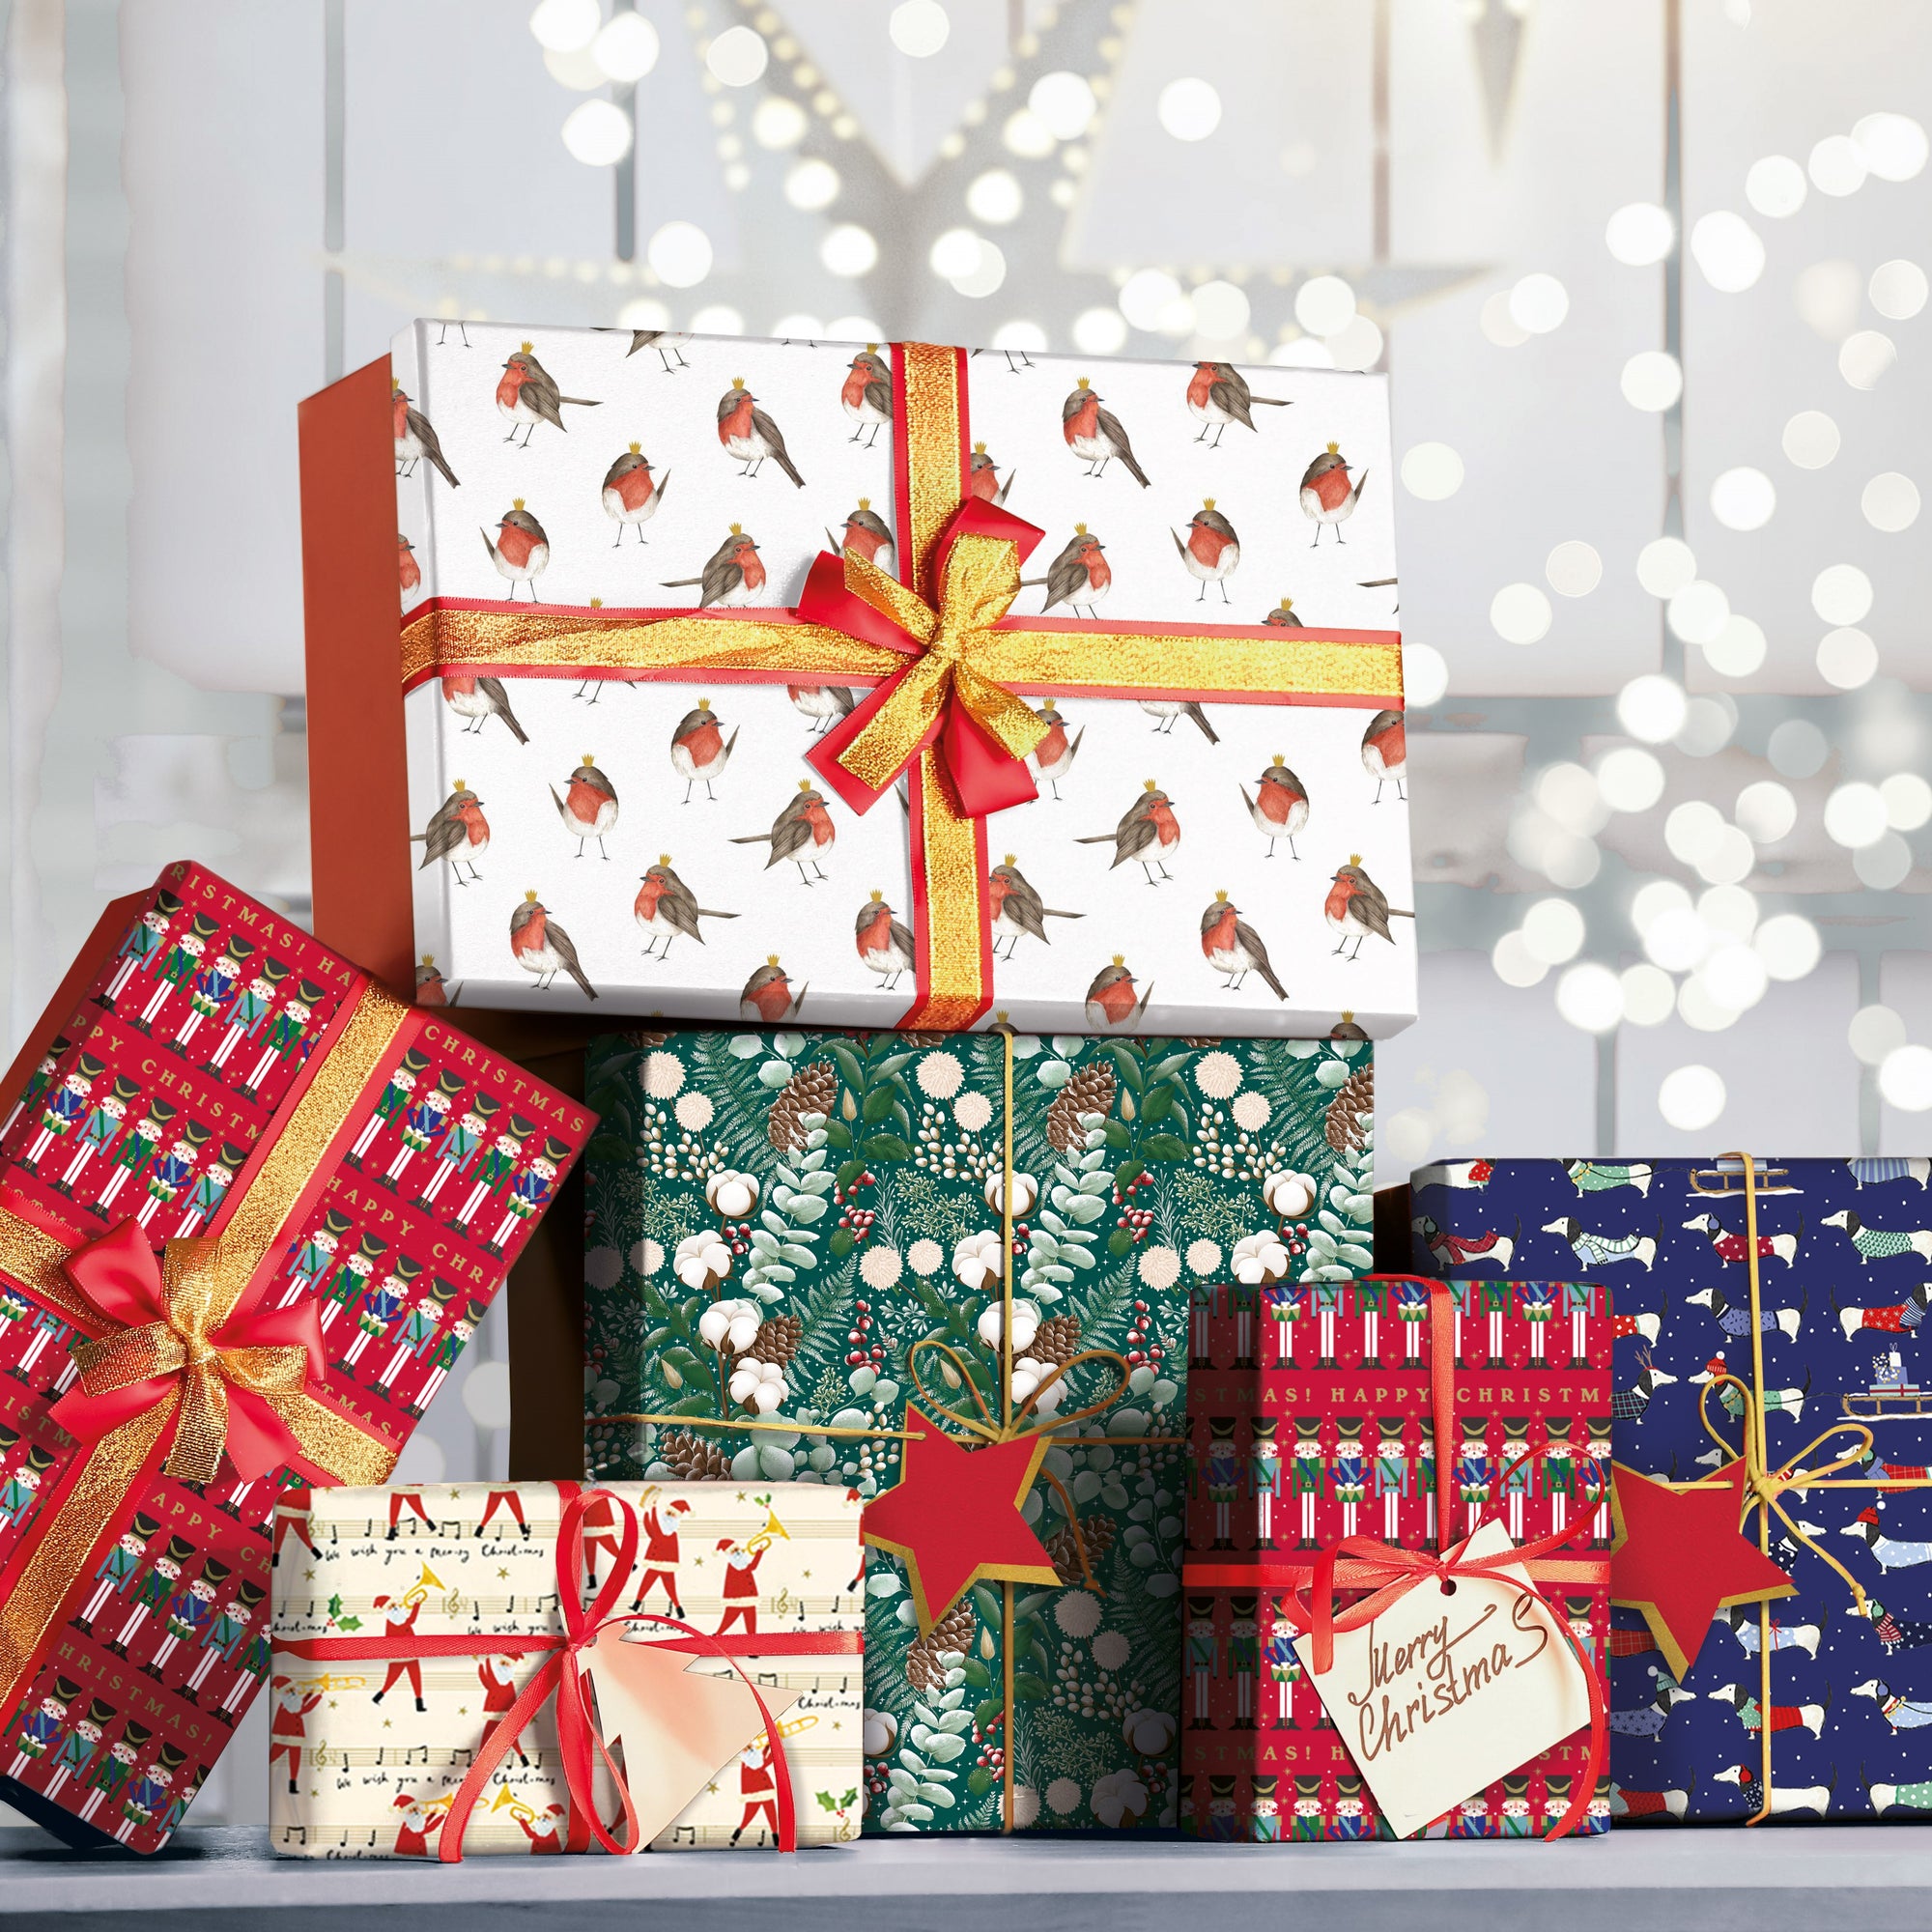 Selection of Christmas wrap from Alzheimer's Society